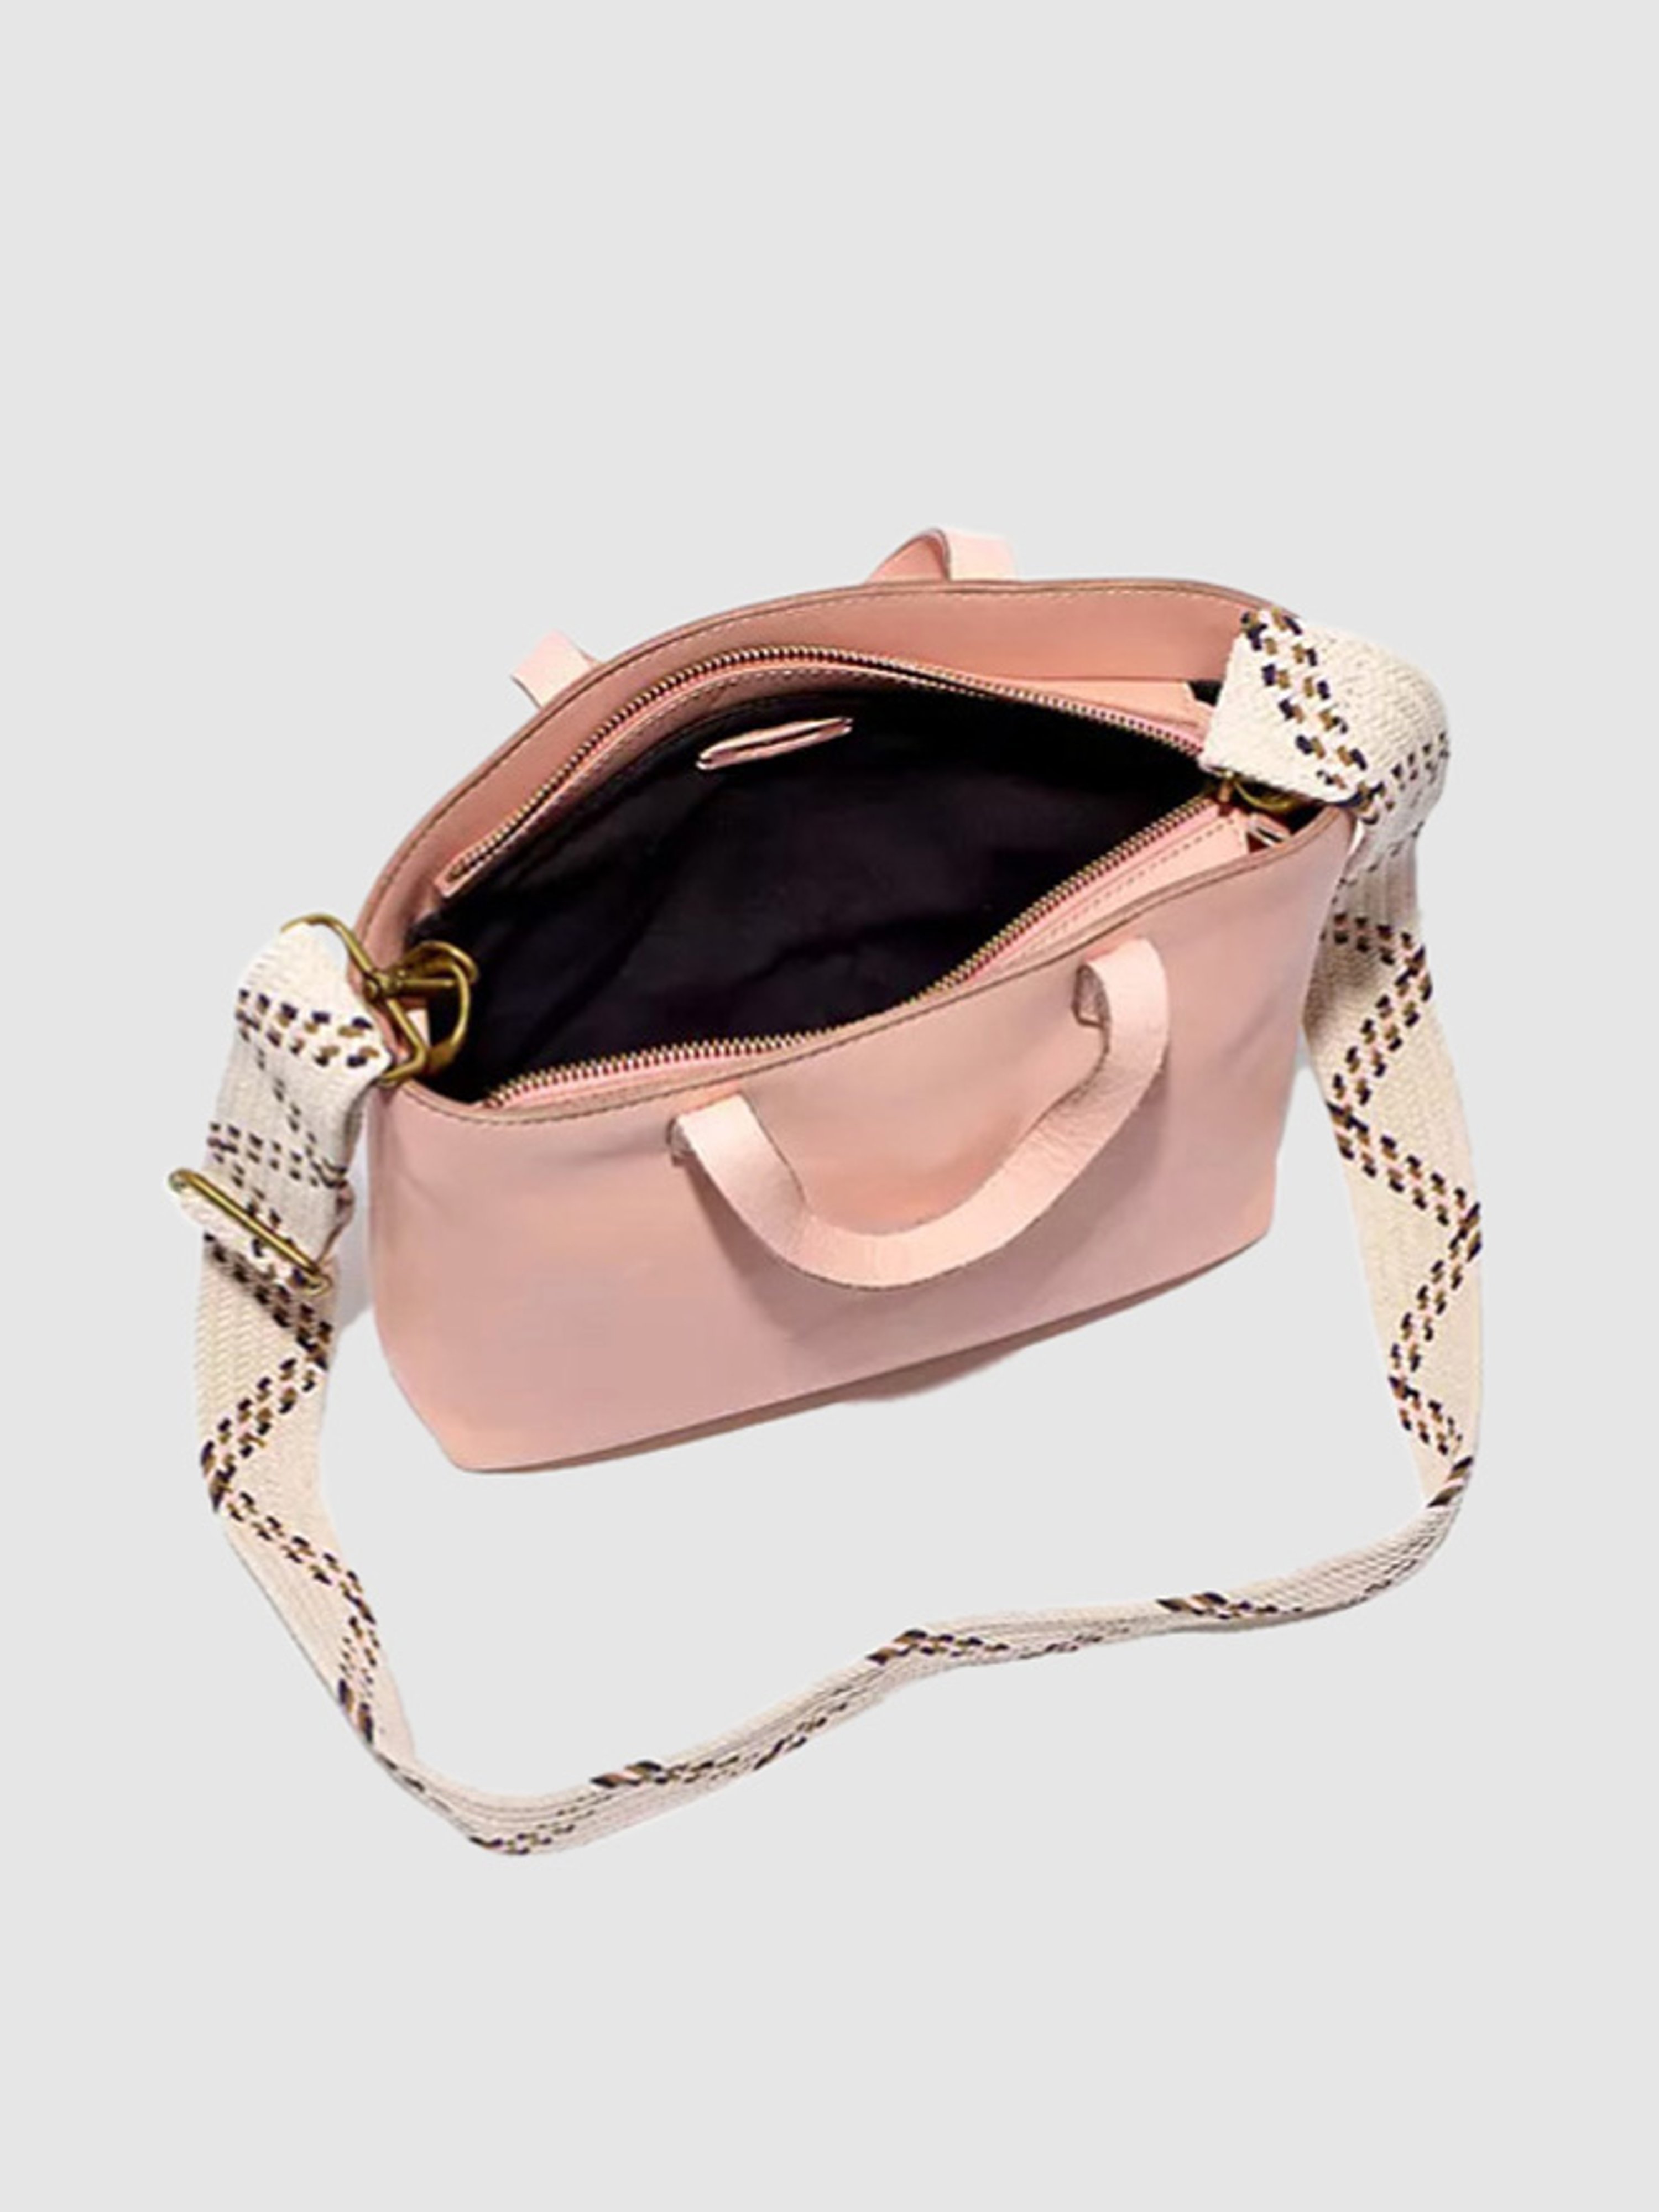 MADEWELL MADEWELL SM INSET ZIP TRANSPORT PINK WITH WEBBING STRAP